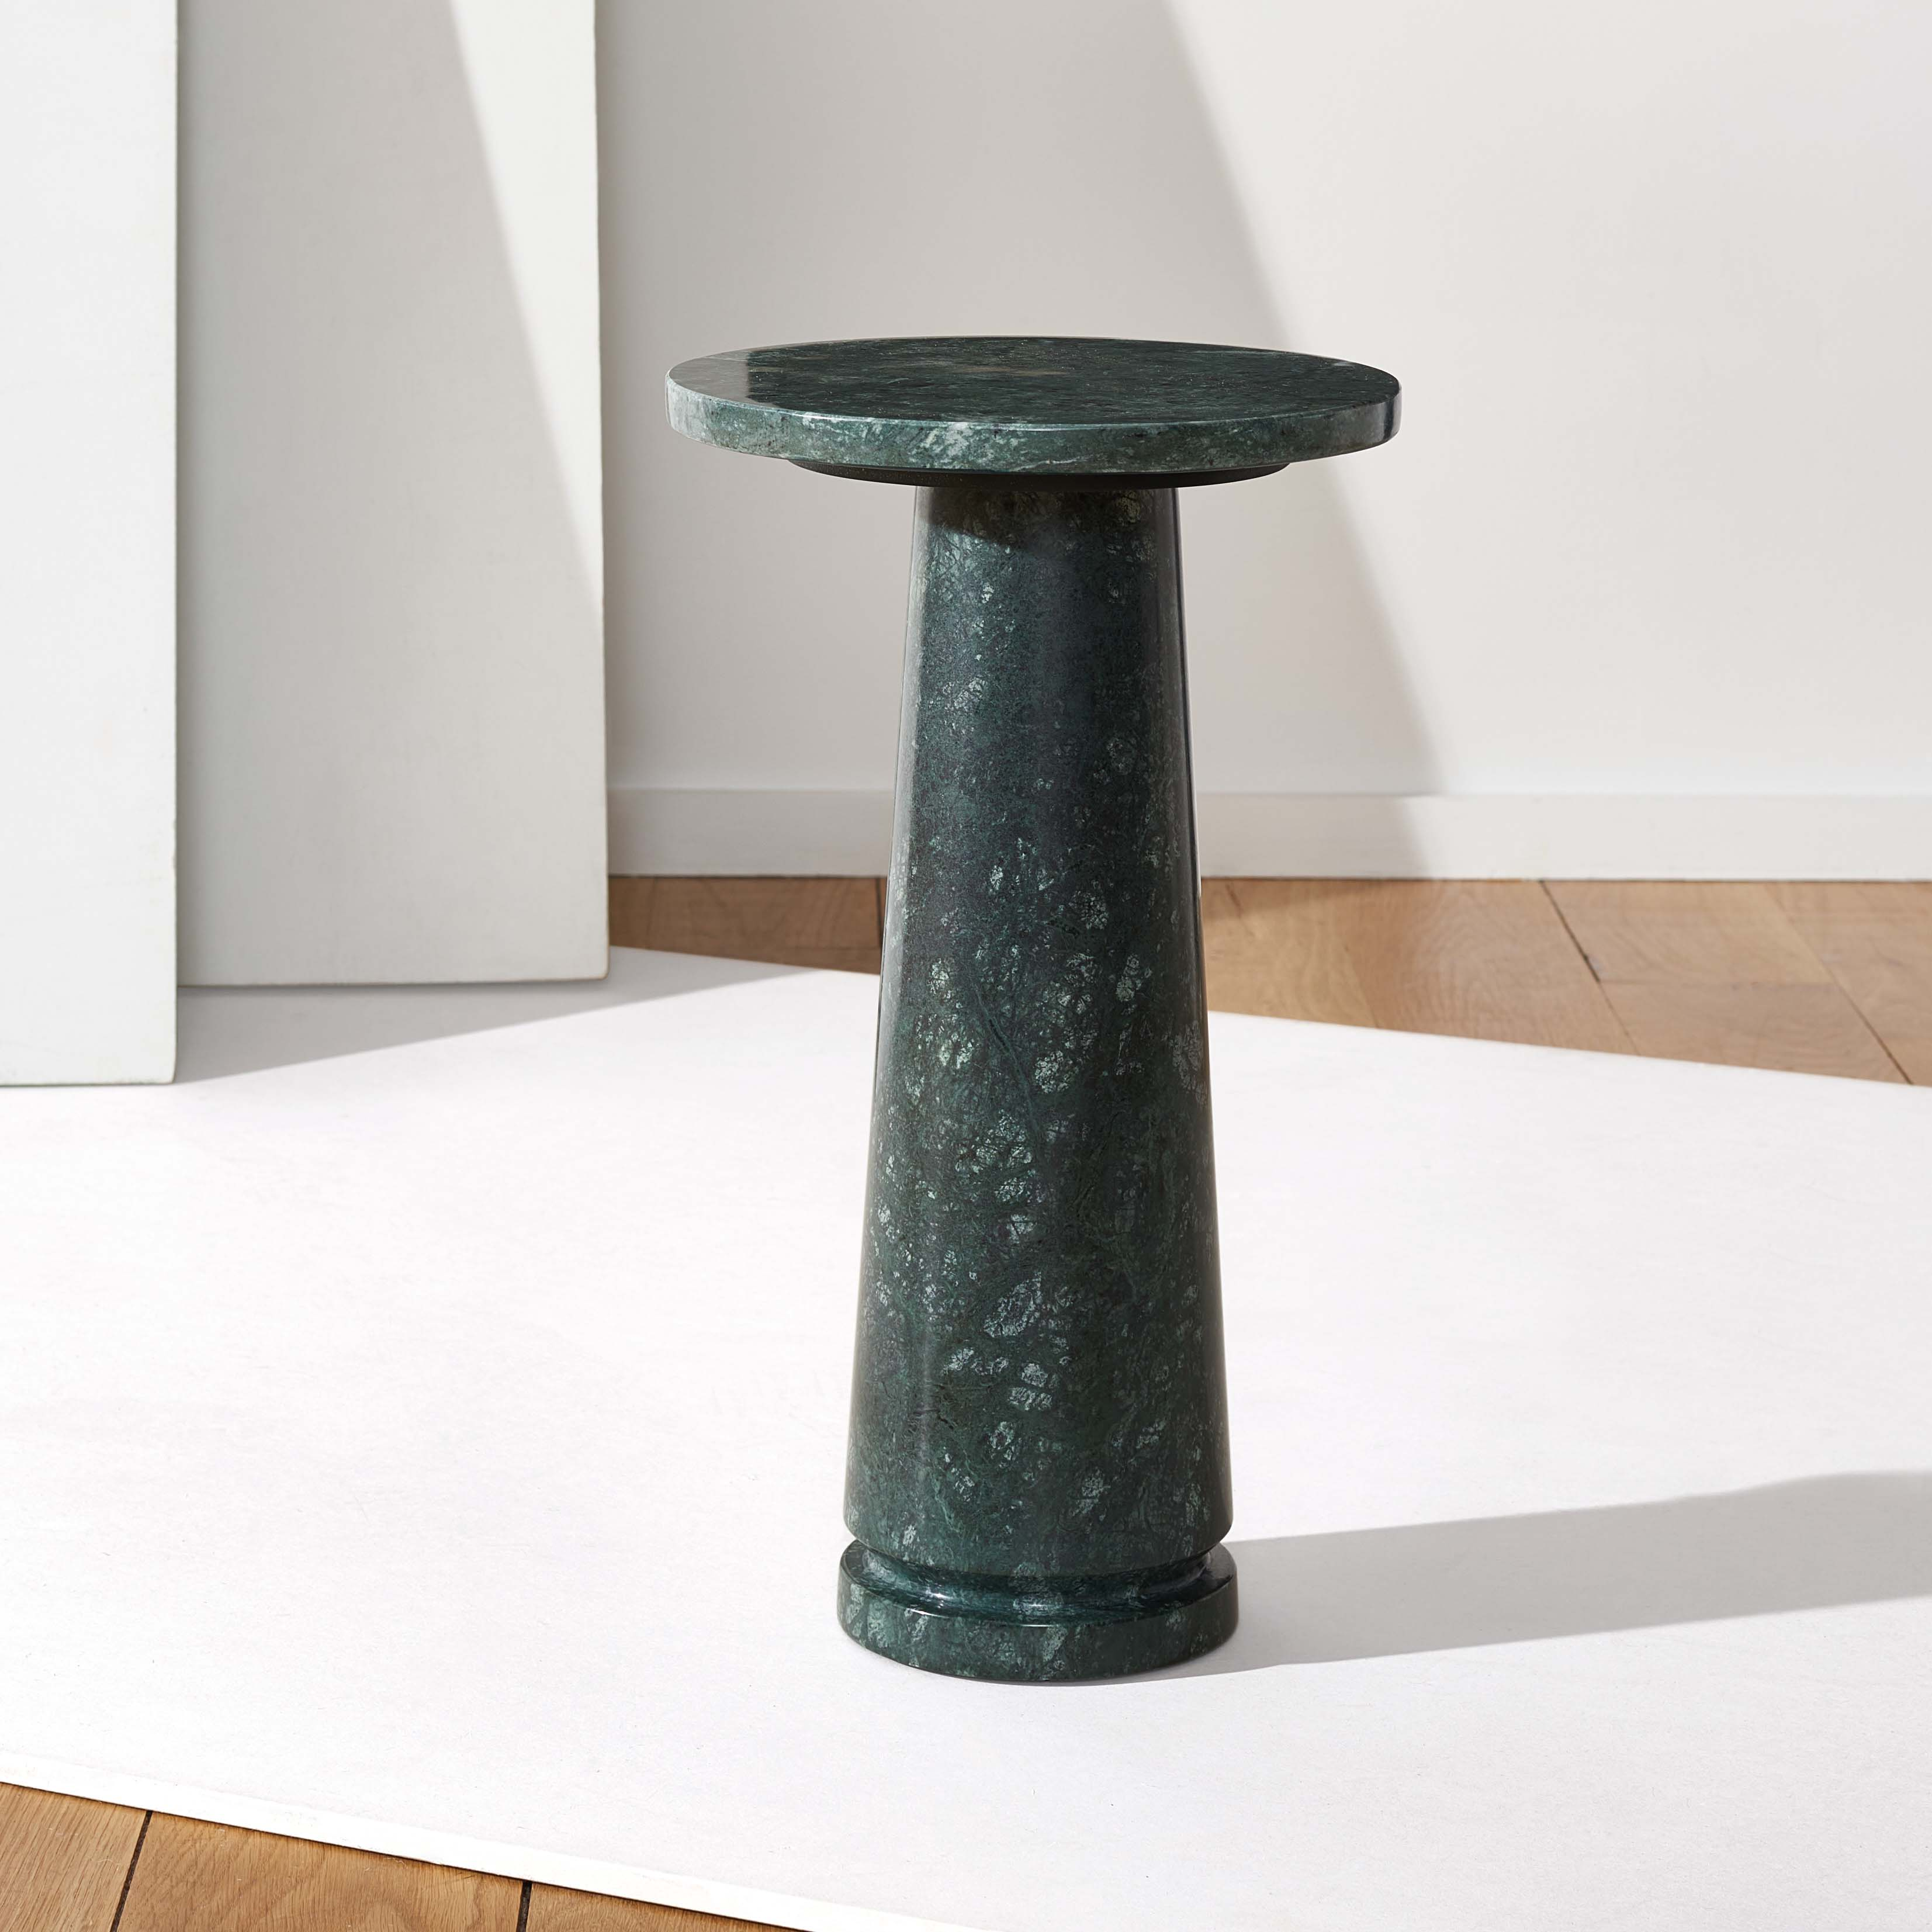 Safavieh Couture Valentia Round Marble Accent Table - Green